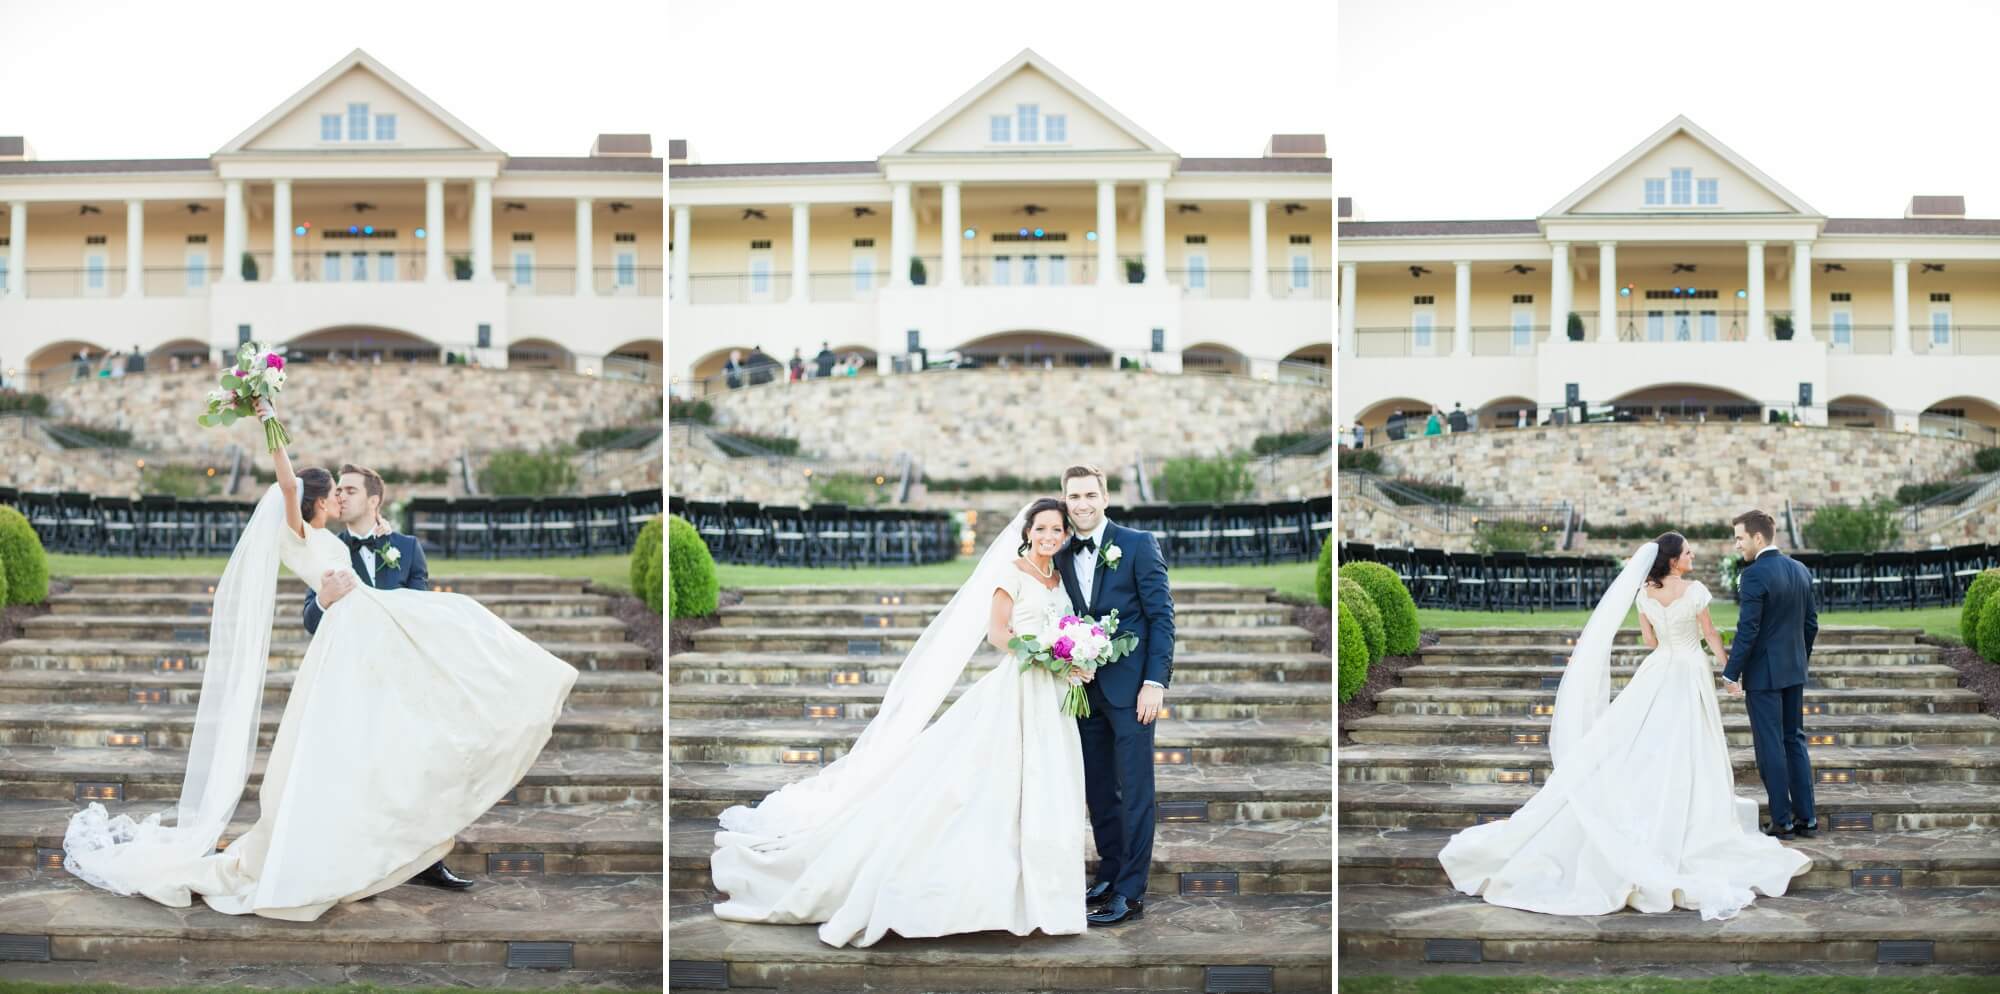 Bride and groom photos after wedding at The Grove golf course in College Grove, TN. Photos by Krista Lee Photography. 